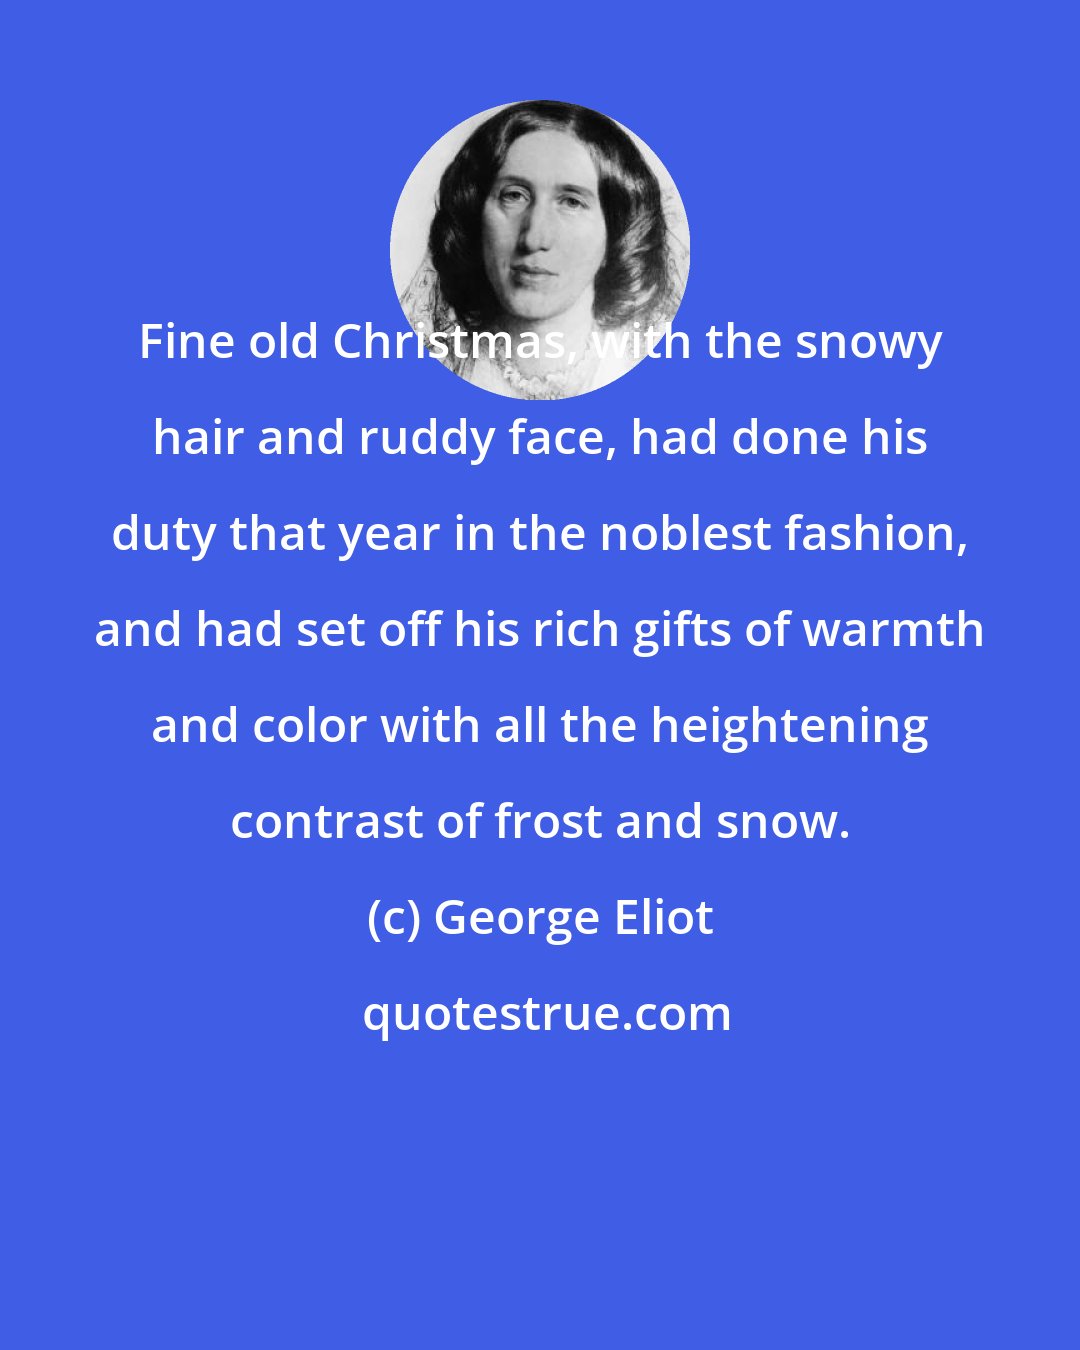 George Eliot: Fine old Christmas, with the snowy hair and ruddy face, had done his duty that year in the noblest fashion, and had set off his rich gifts of warmth and color with all the heightening contrast of frost and snow.